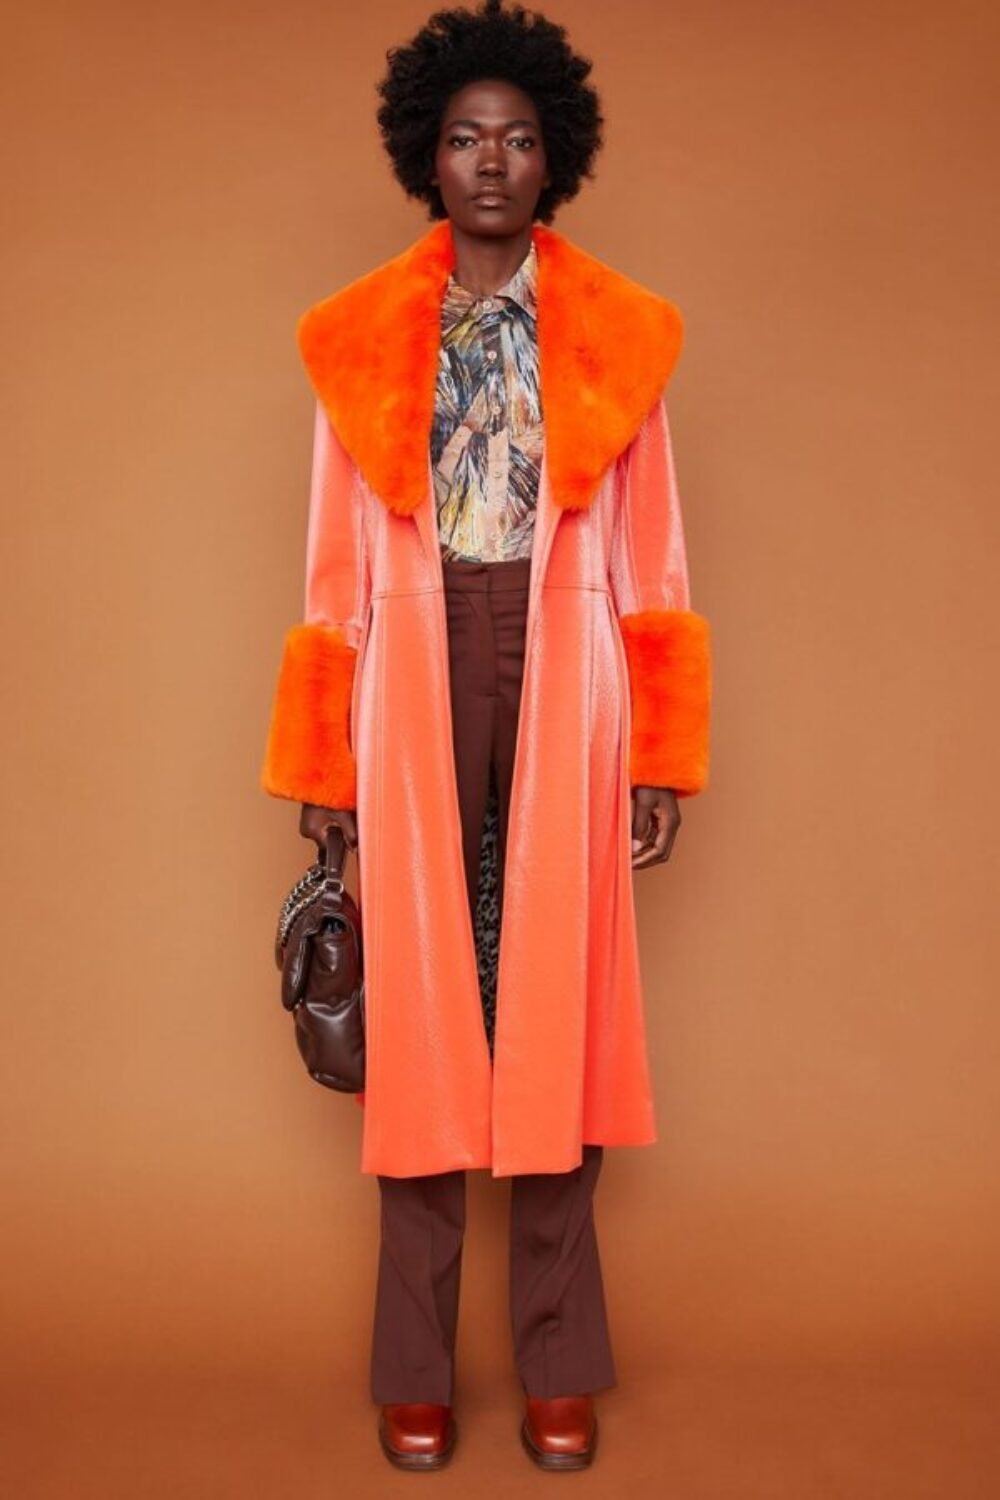 Shop Lux Orange Trench Style Belted Coat with Faux Fur Cuffs and Collar and women's luxury and designer clothes at www.lux-apparel.co.uk